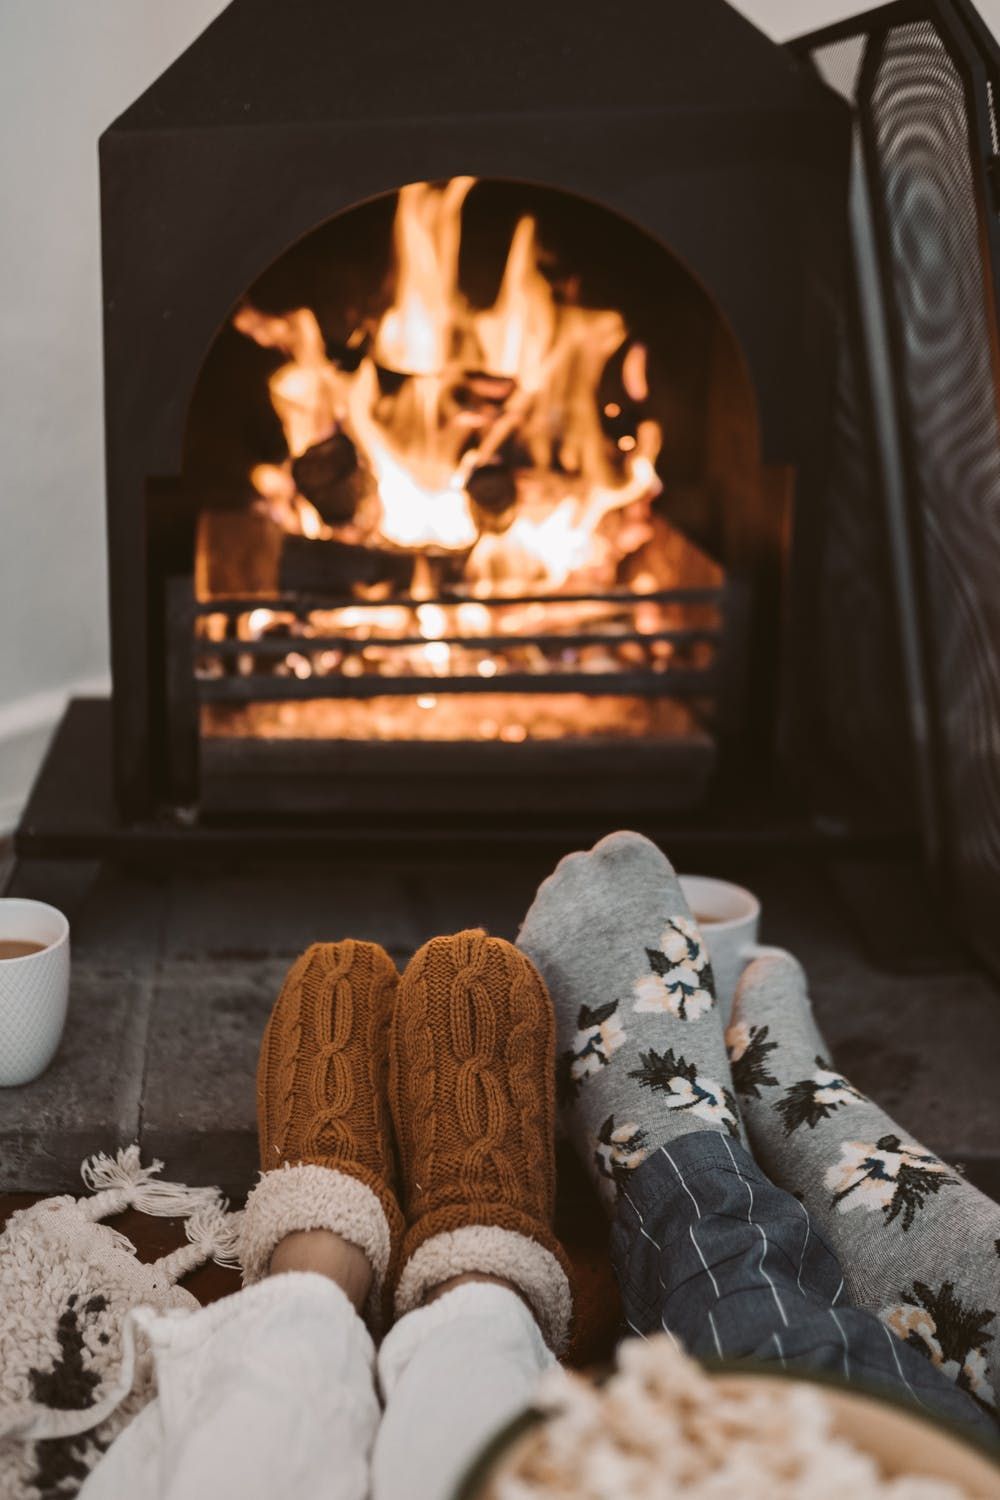 Free Beautiful Winter Wallpaper For iPhone That You'll Love. Winter wallpaper, Cozy fireplace, iPhone wallpaper winter